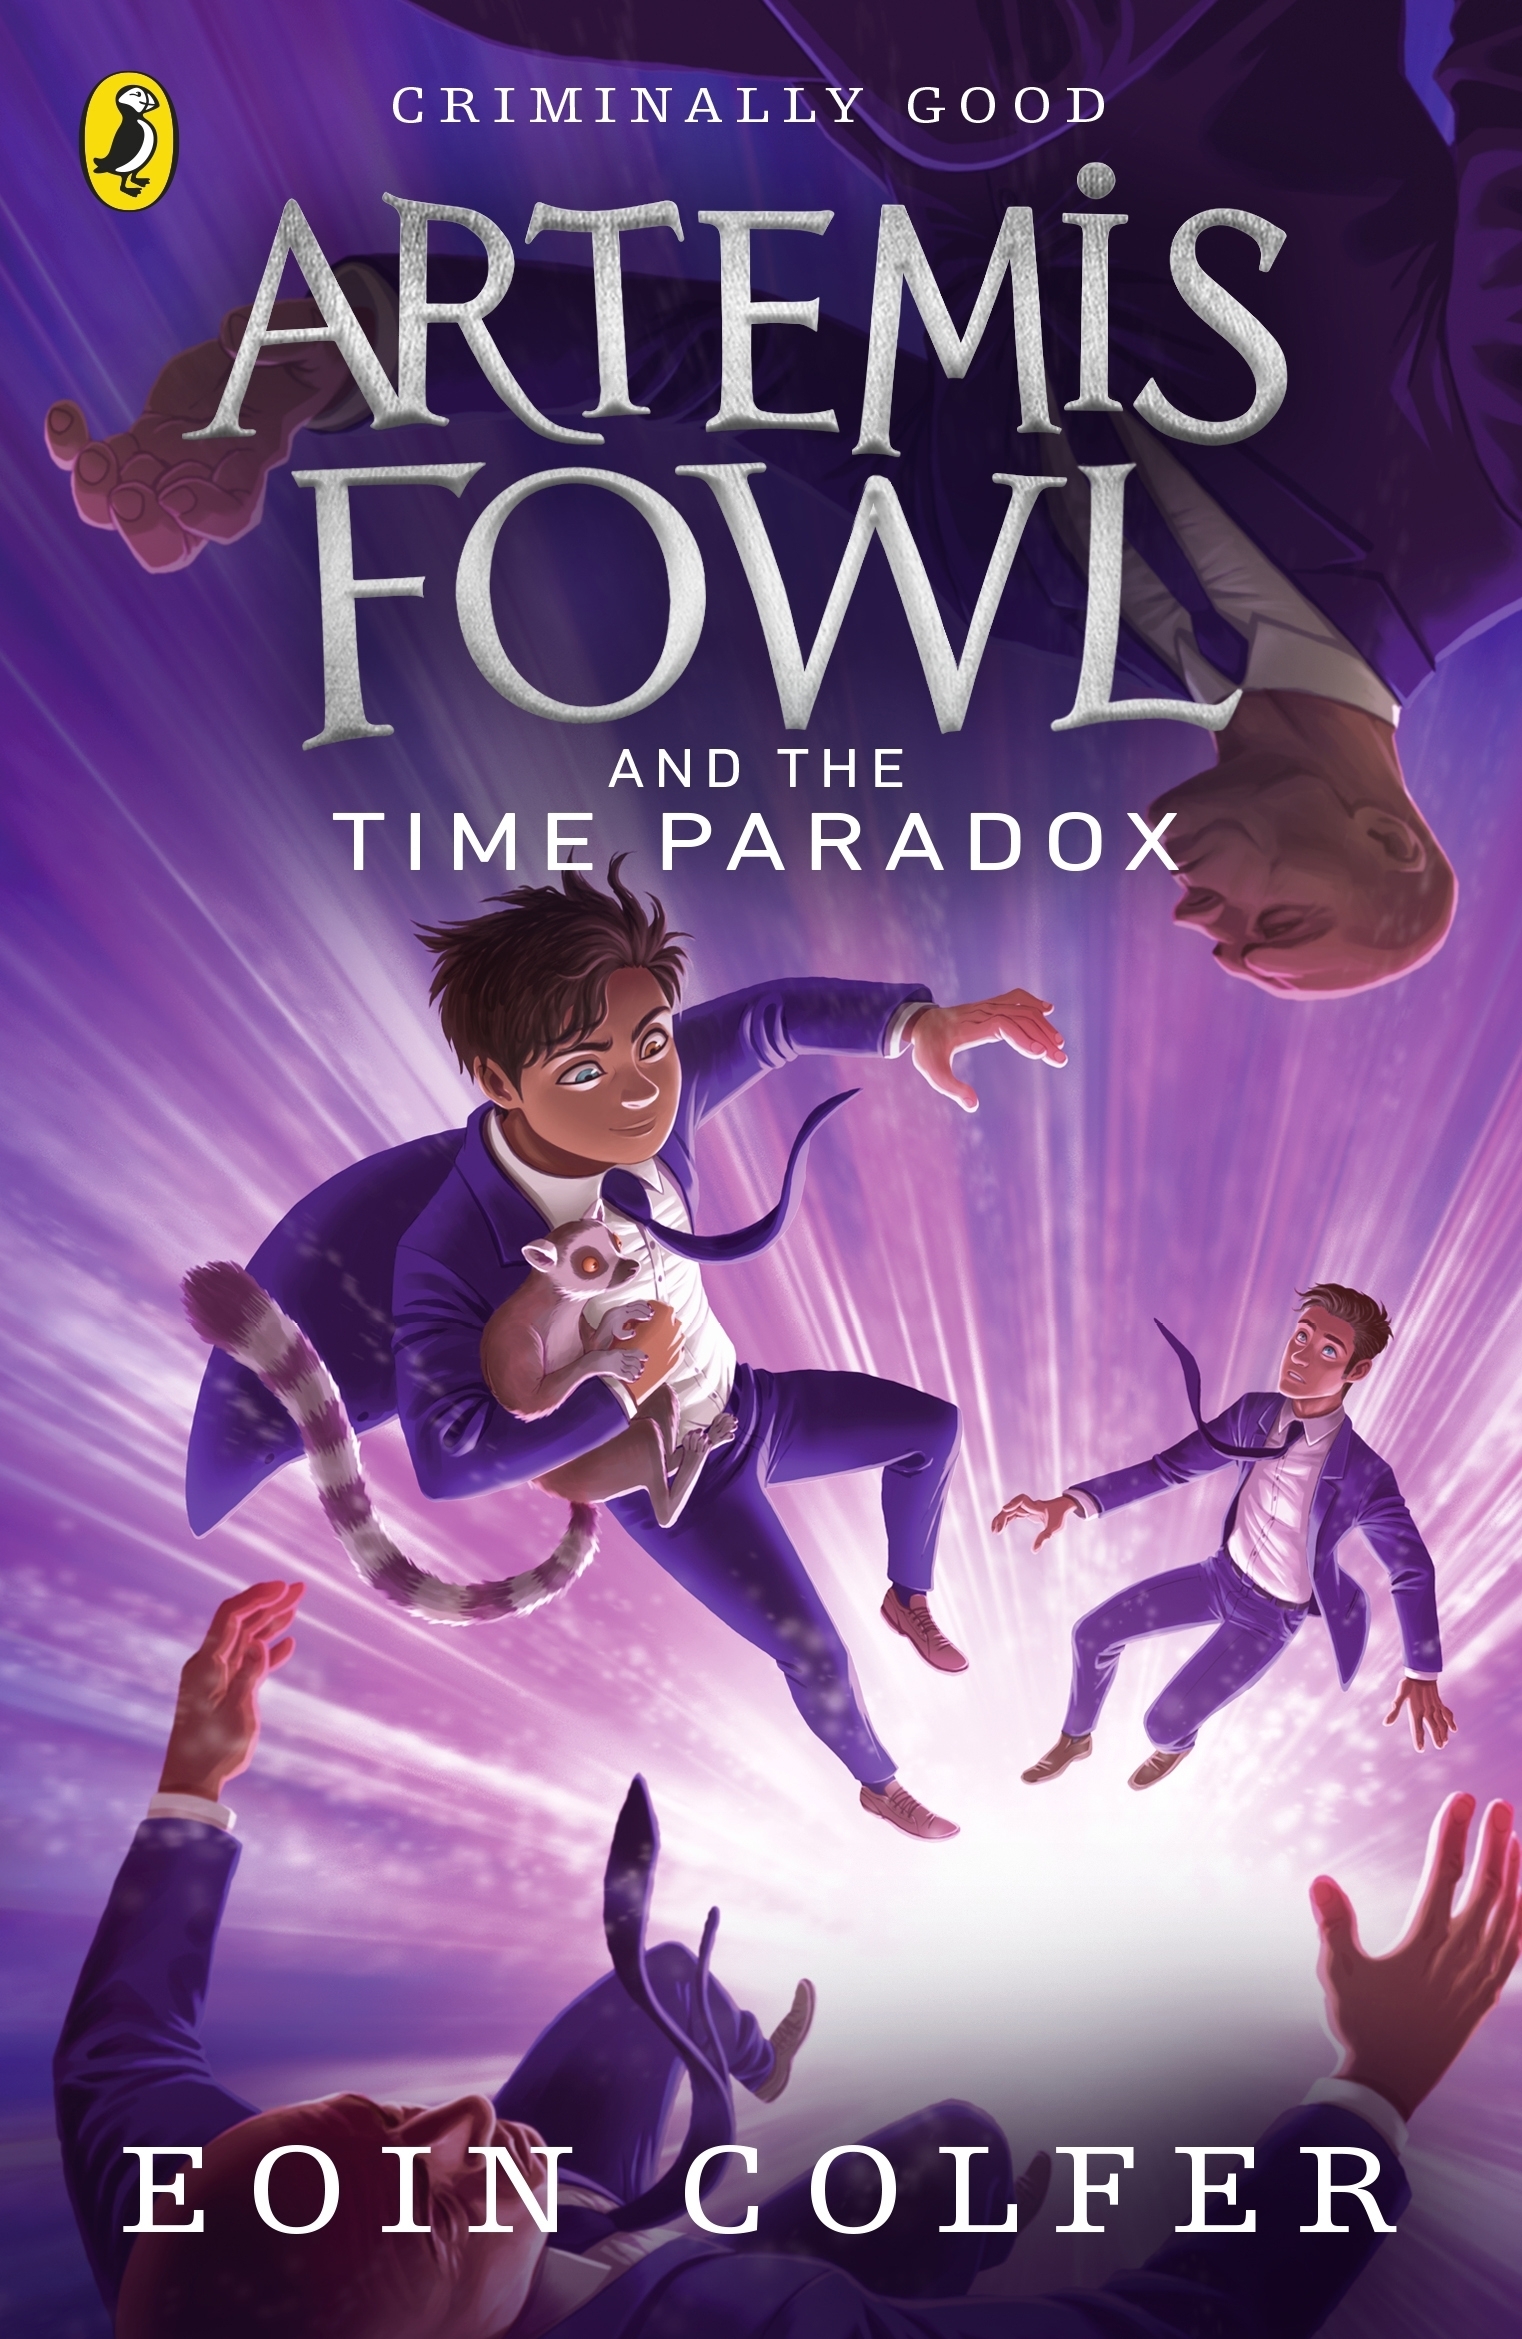 Eoin Colfer Artemis Fowl: the Graphic Novel by Eoin Colfer